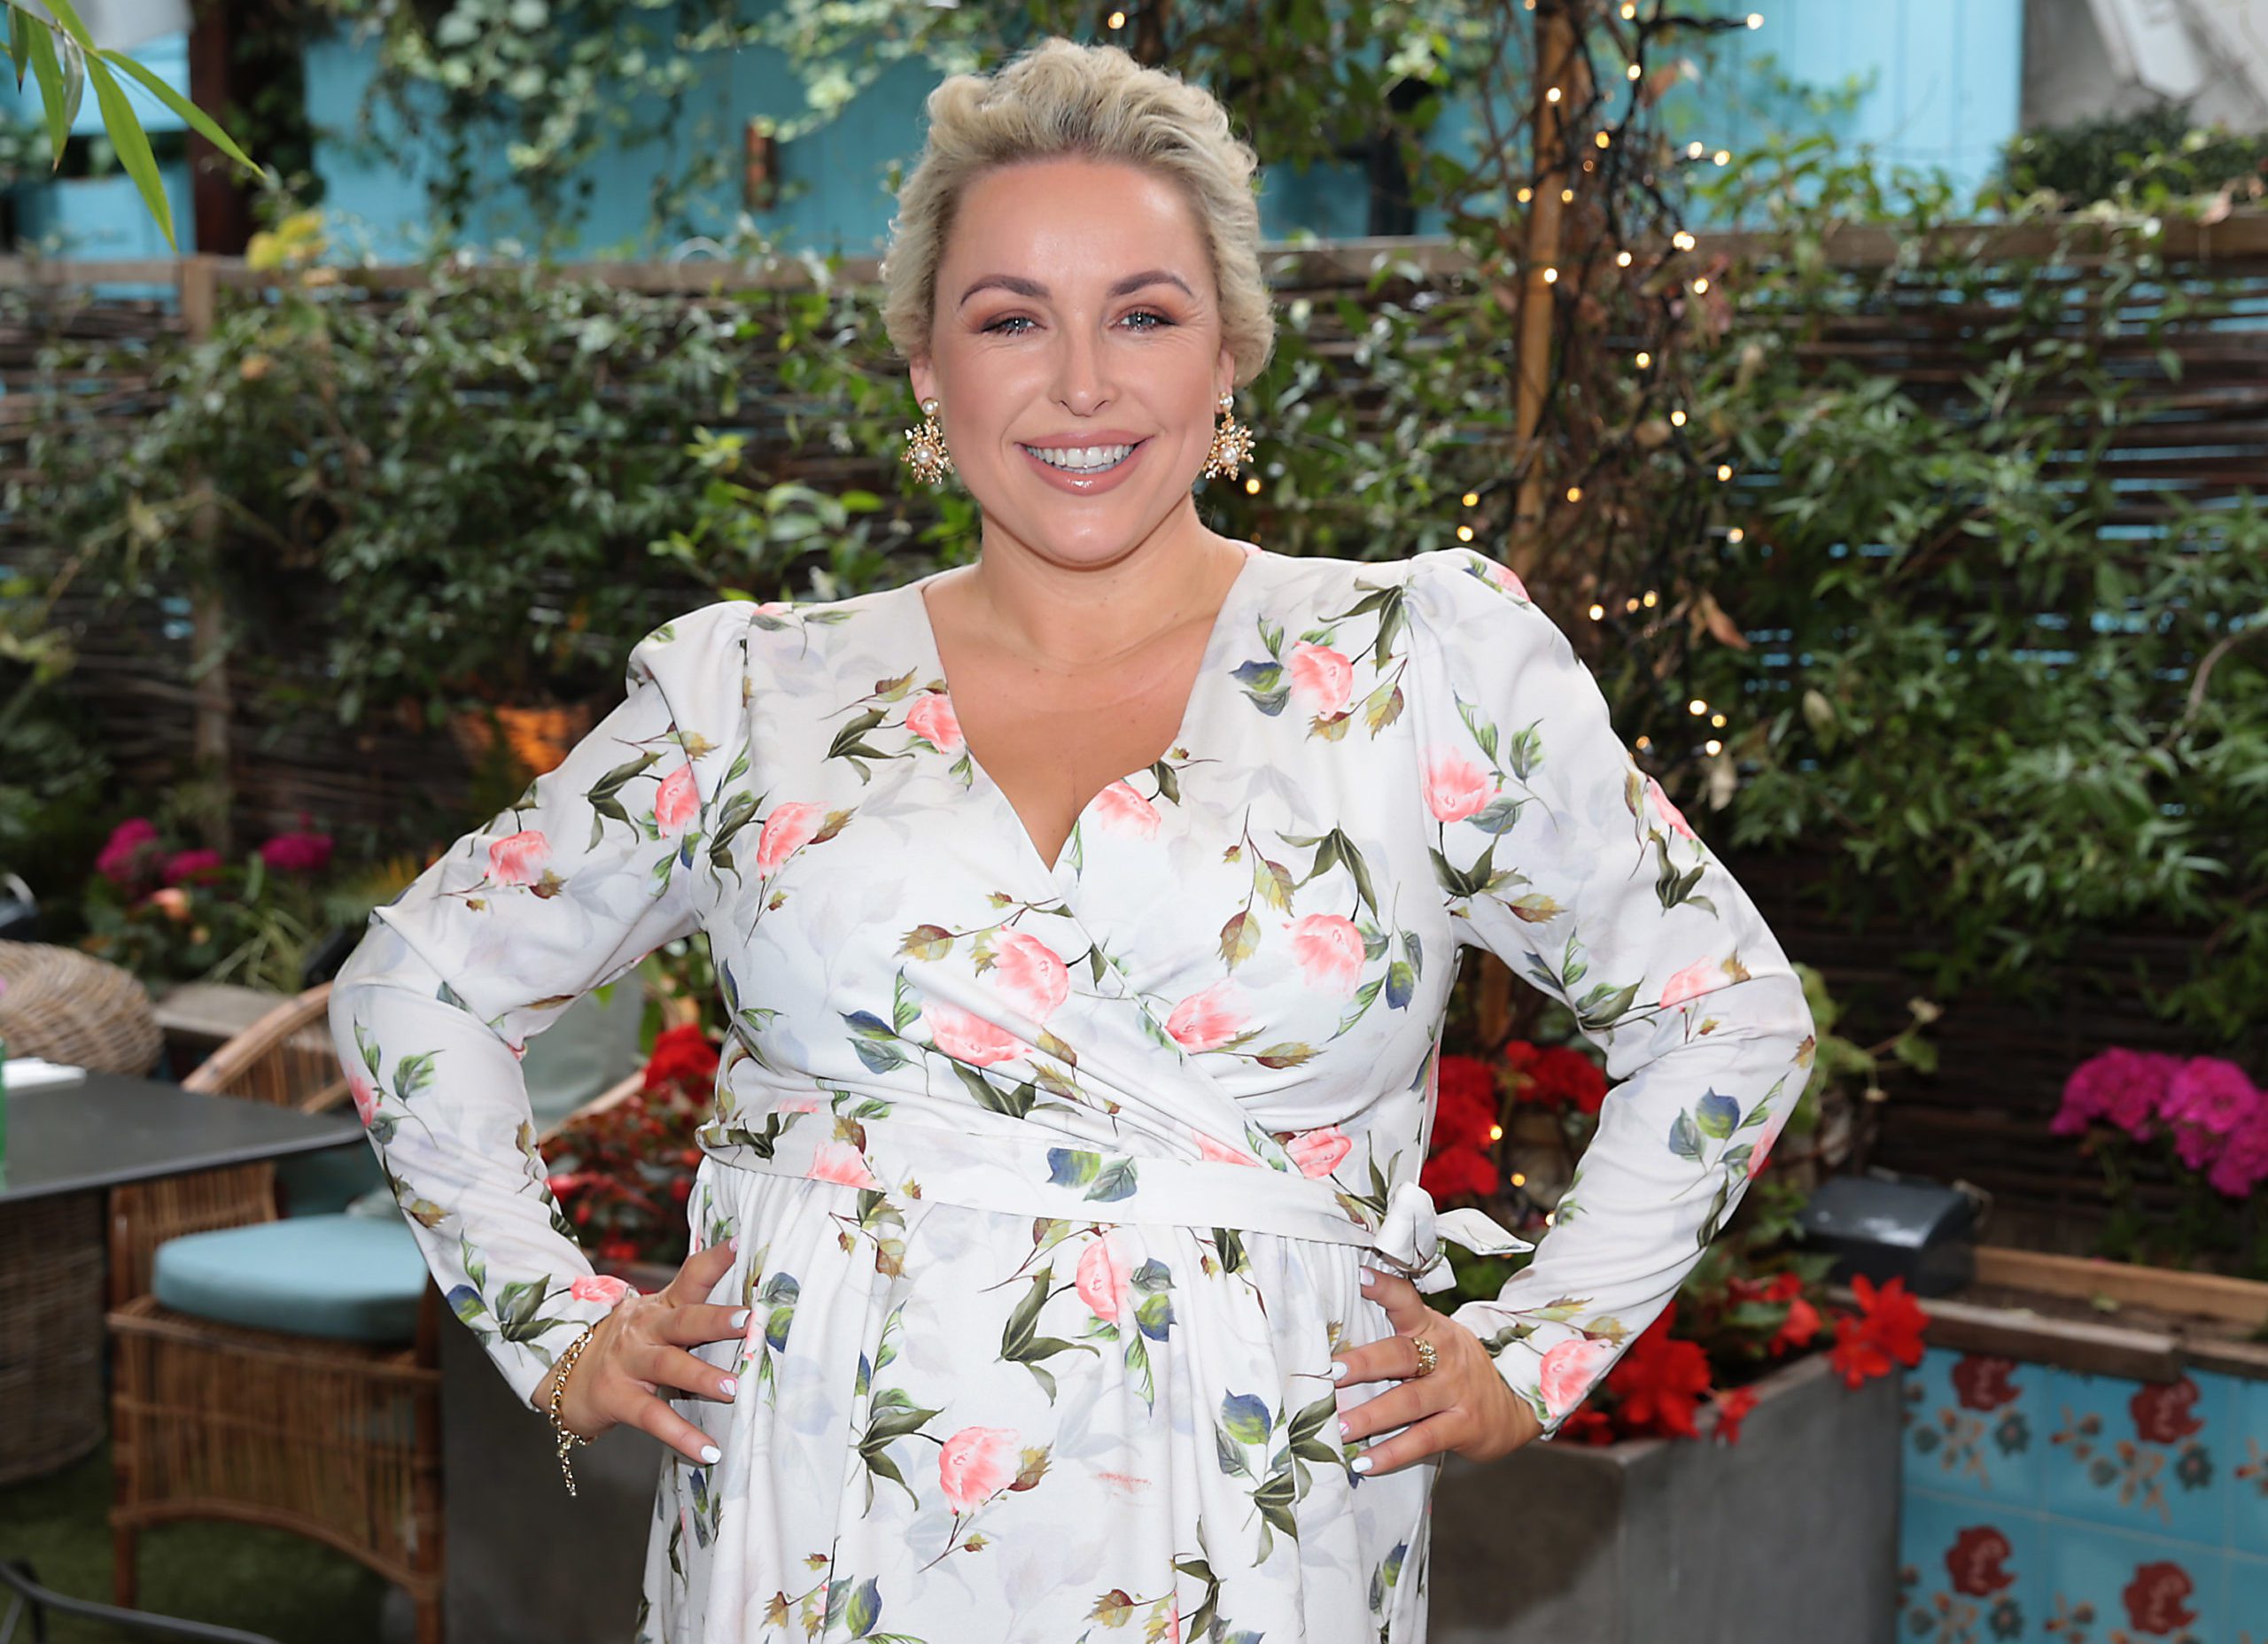 Sinead O' Brien of Sineads Curvy Style tells all in exclusive interview